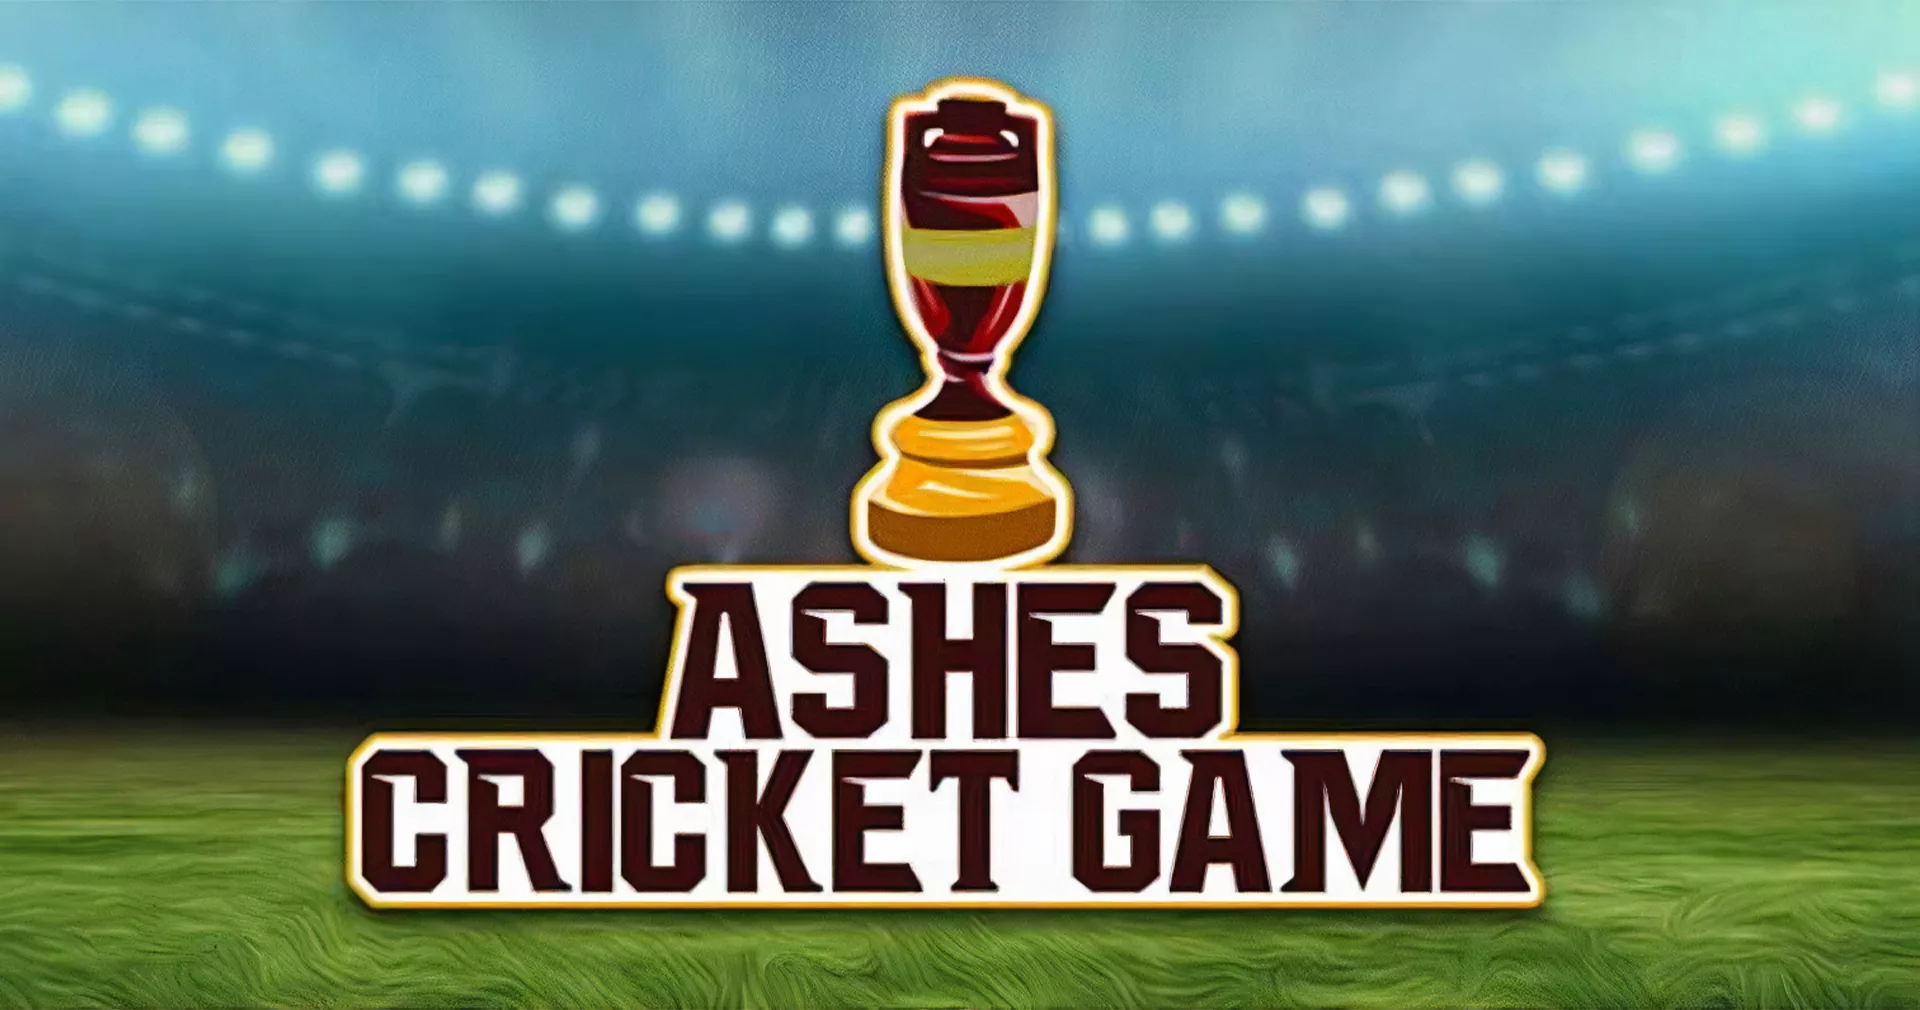 You can place bets on The Ashes Series after registering on the site